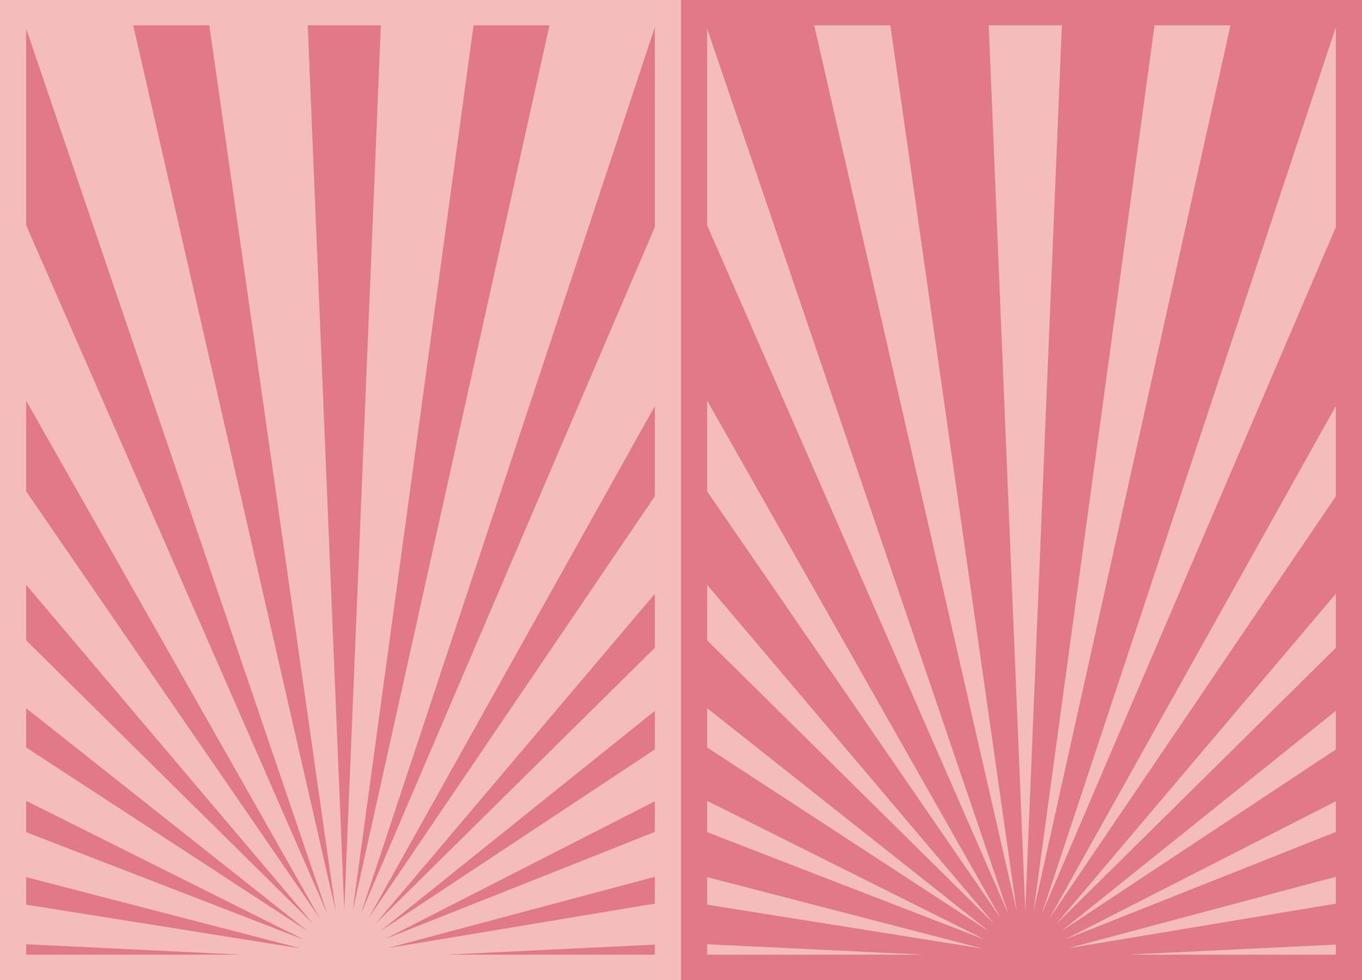 Vintage Pink Sunburst Stripes Poster Set, Template With Rays Centered at the Bottom. Retro Inspired Cartoon Vertical Posters. vector